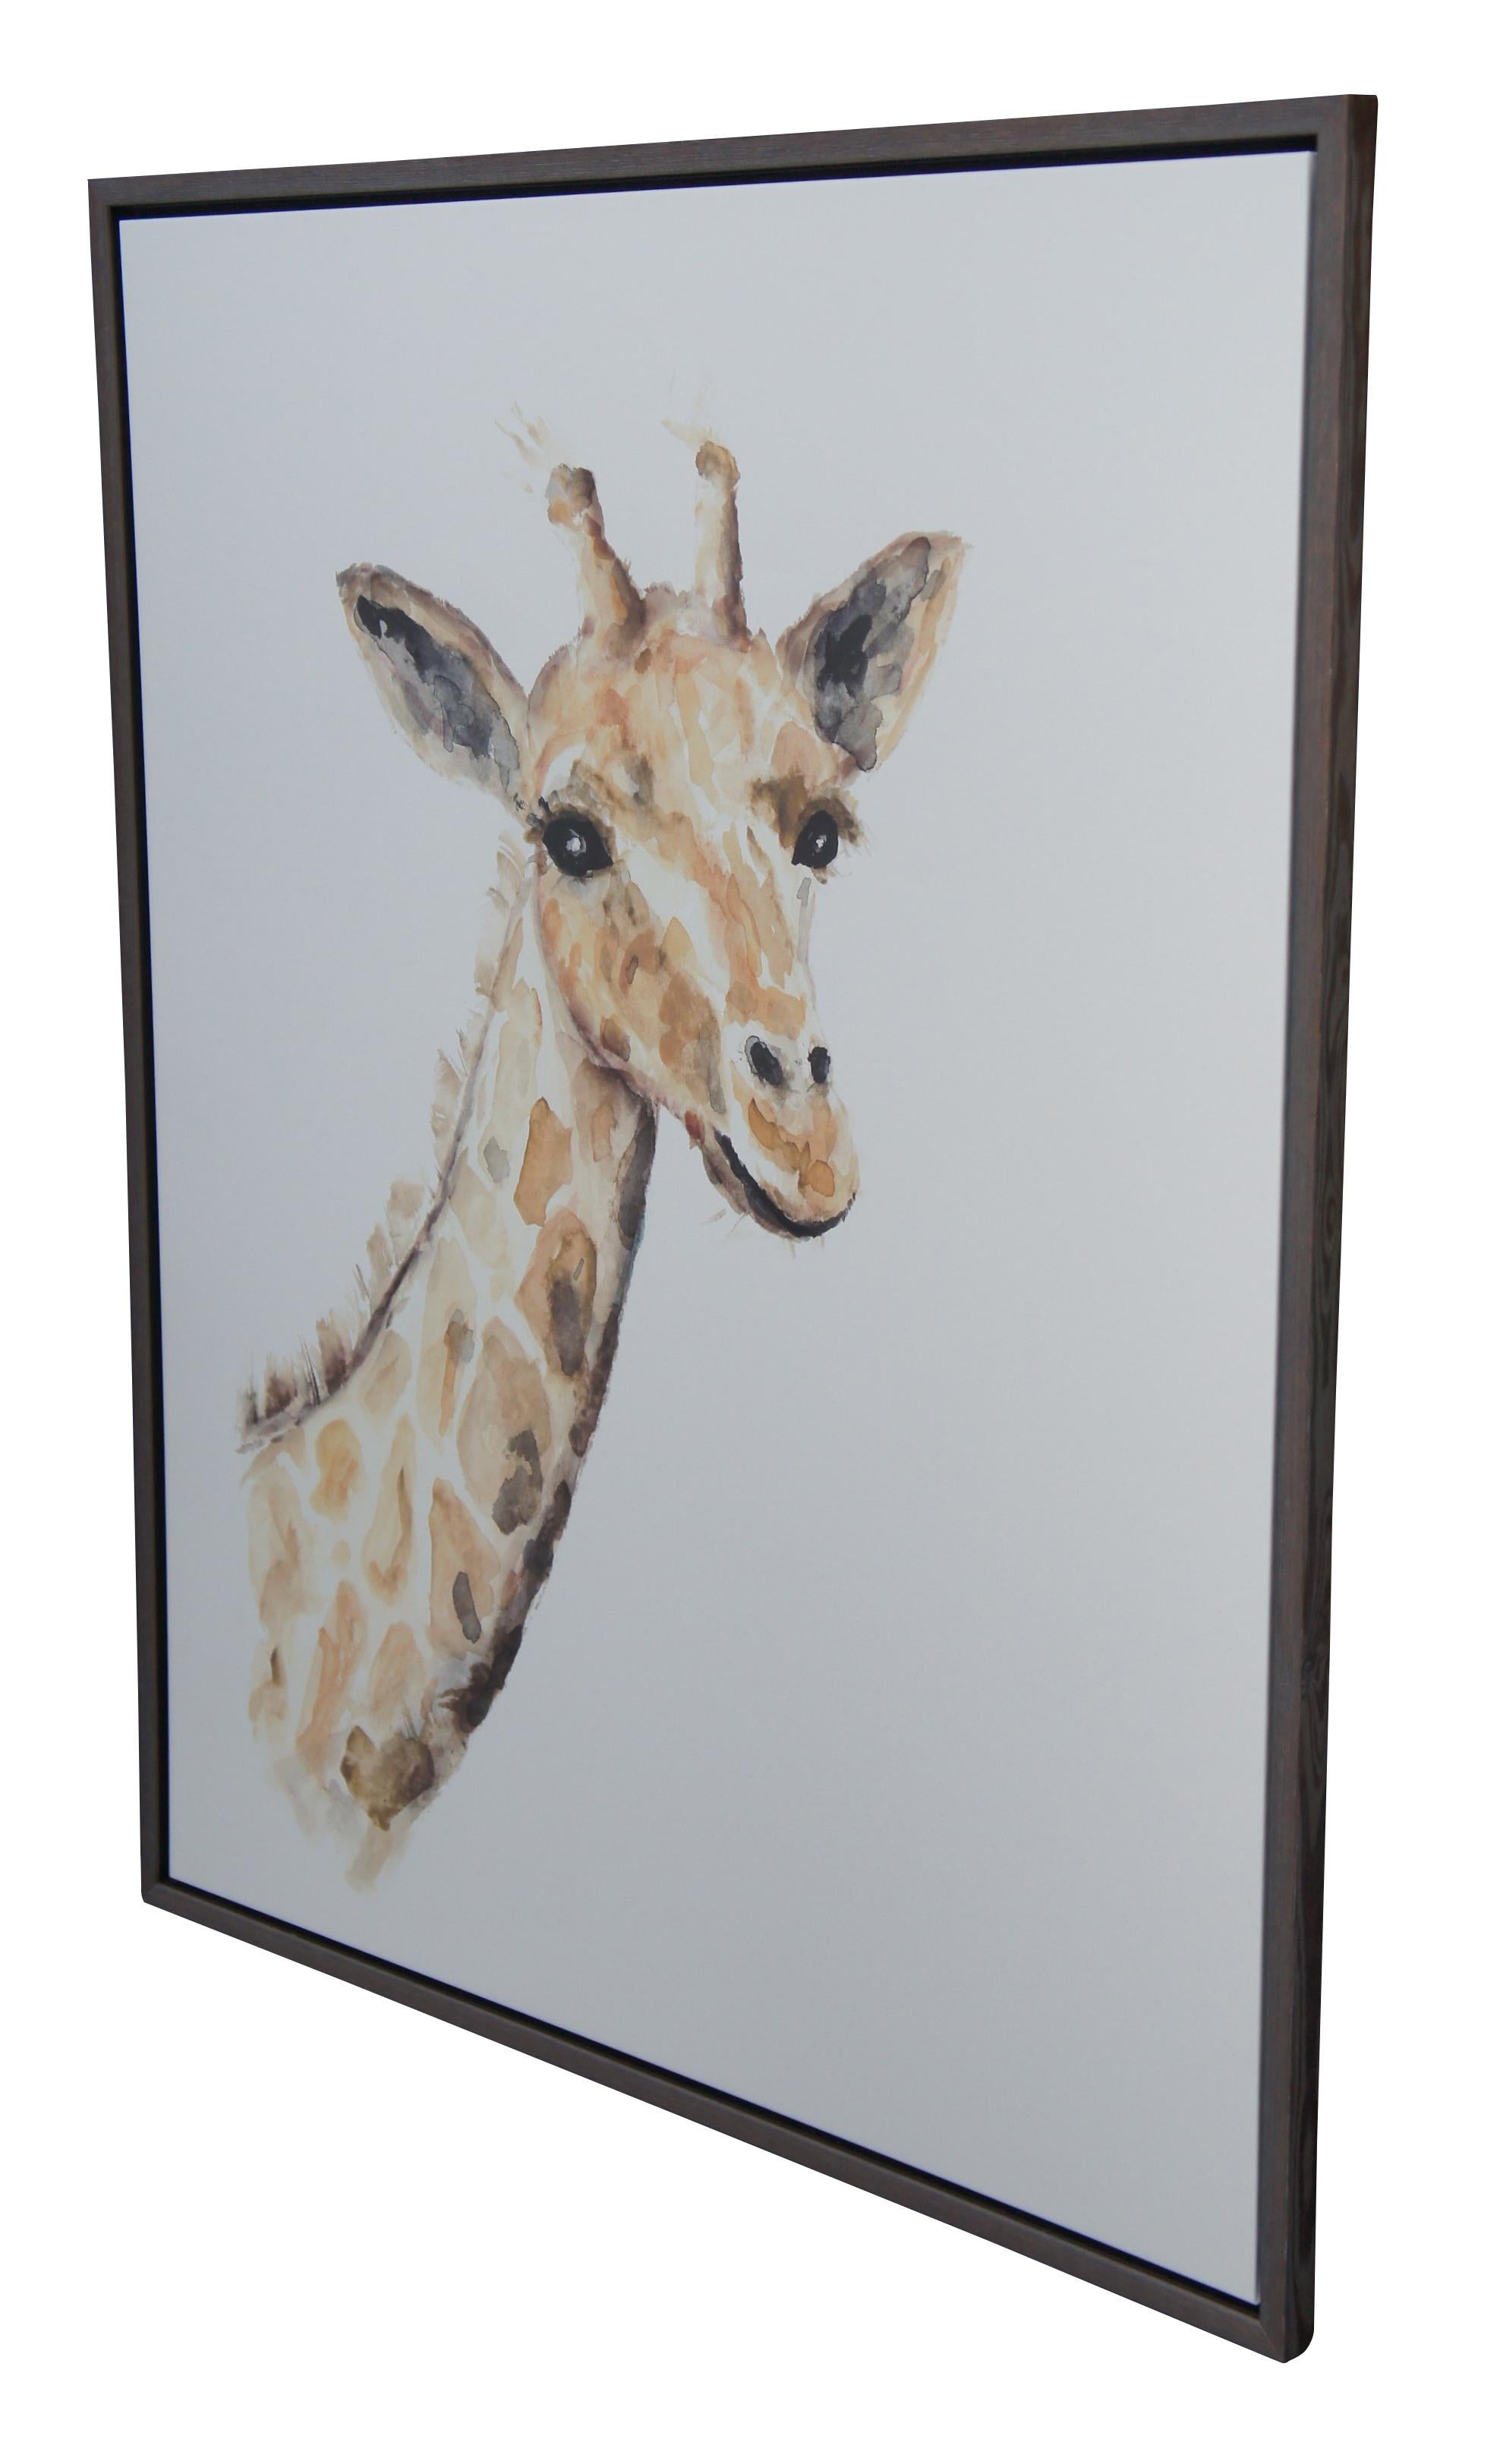 A fun giraffe watercolor painting on canvas from Restoration Hardware.  Framed in oak by the Larson Juhl an industry leader in framing.  


Dimensions:
42.5